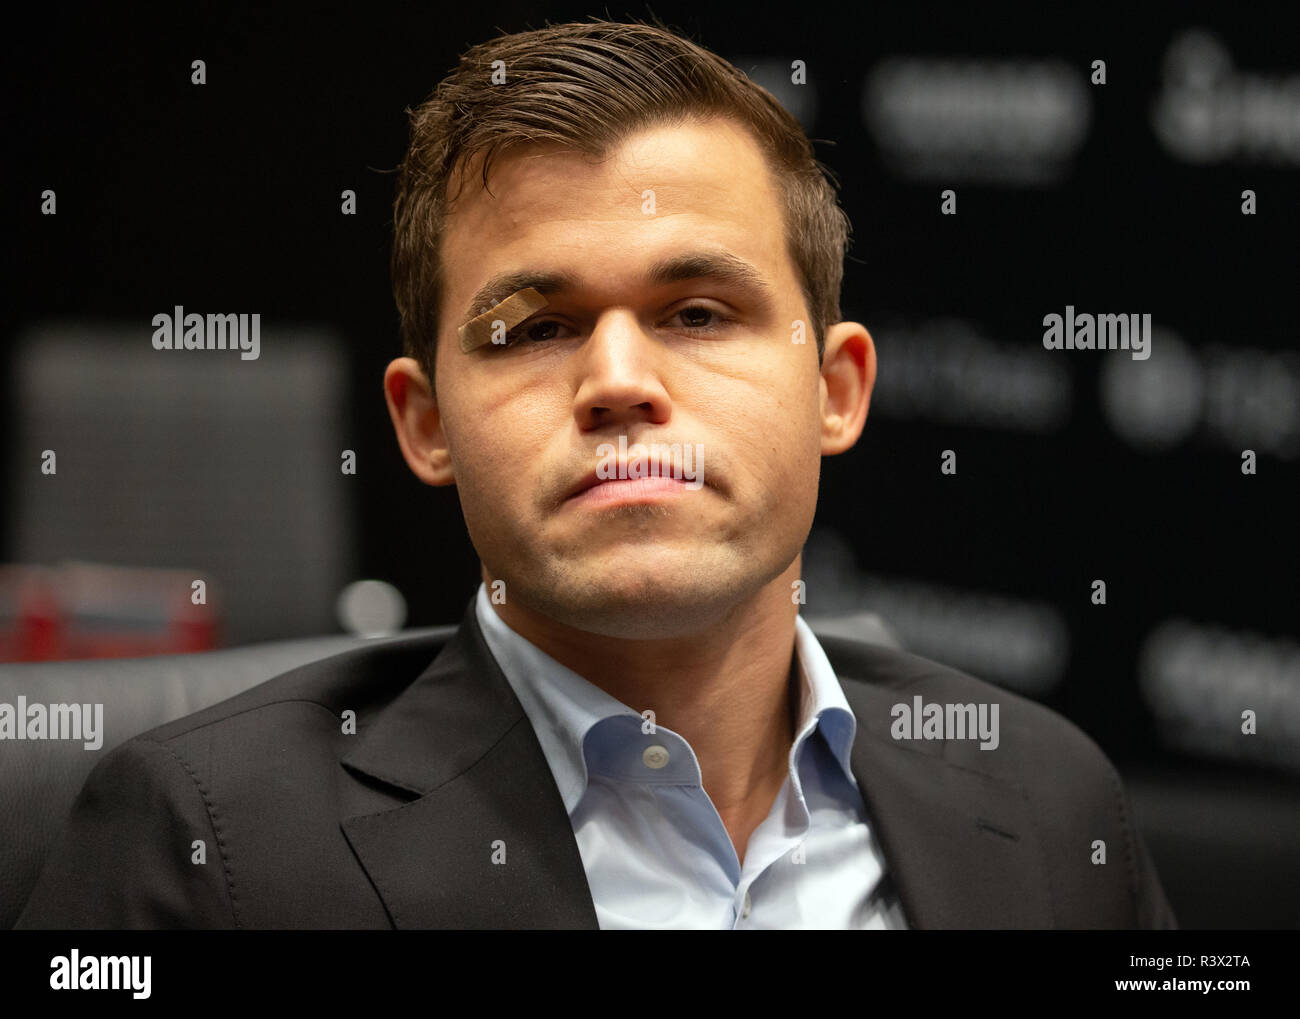 Magnus Carlsen, Norwegian chess Grandmaster current World Champion and number one, at the World Chess Championship in London Stock Photo Alamy